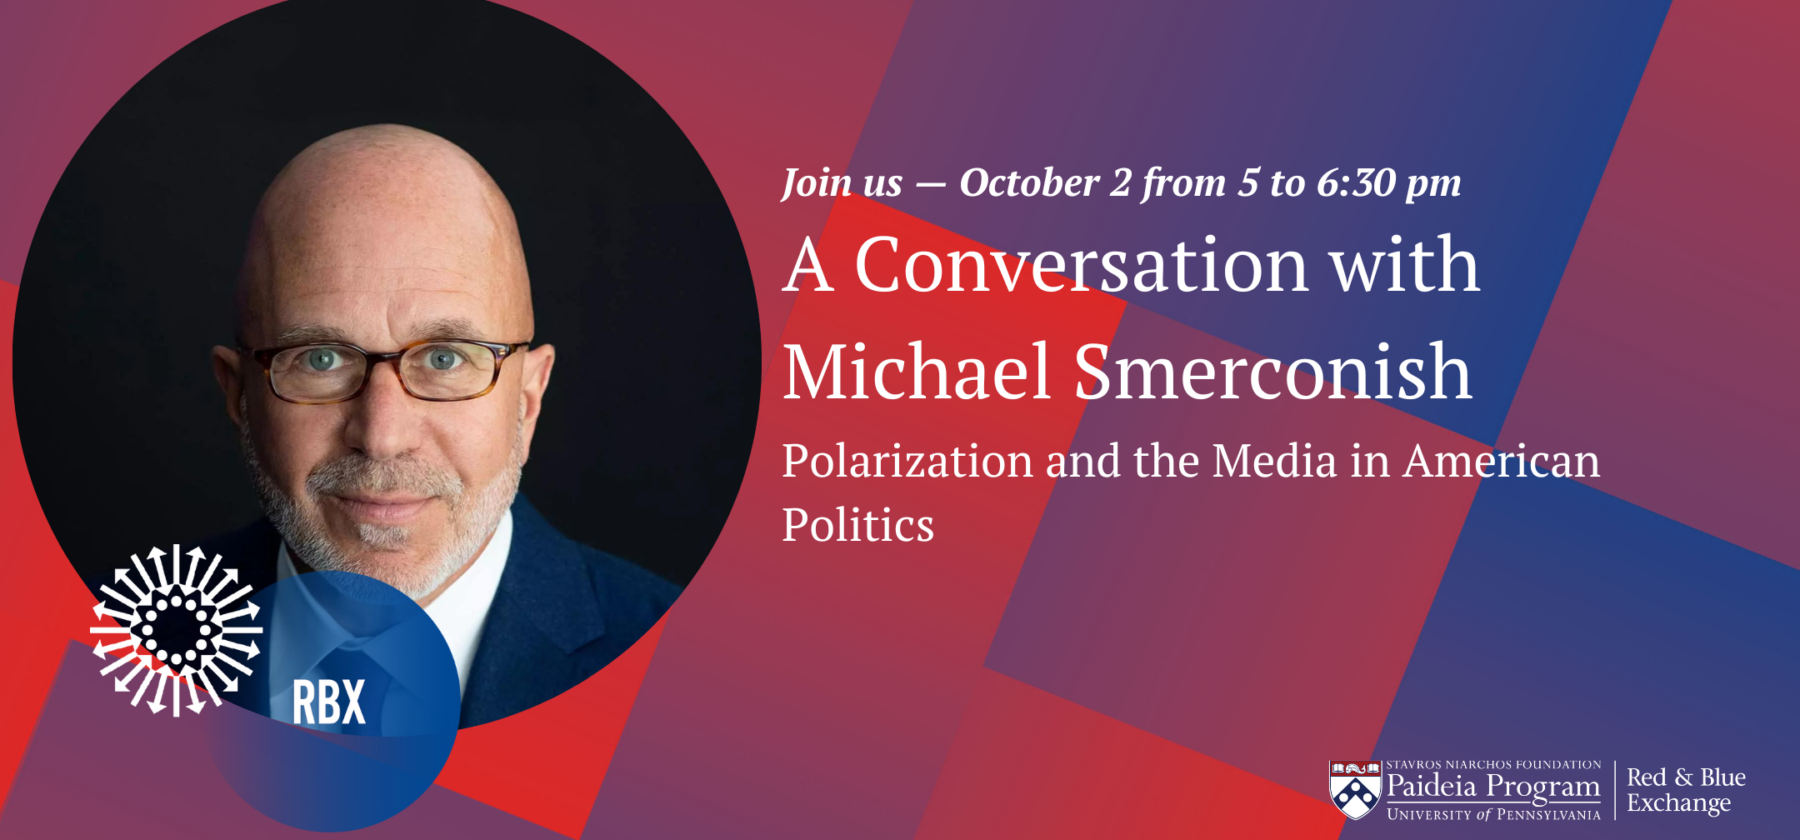 A Conversation with Michael Smerconish